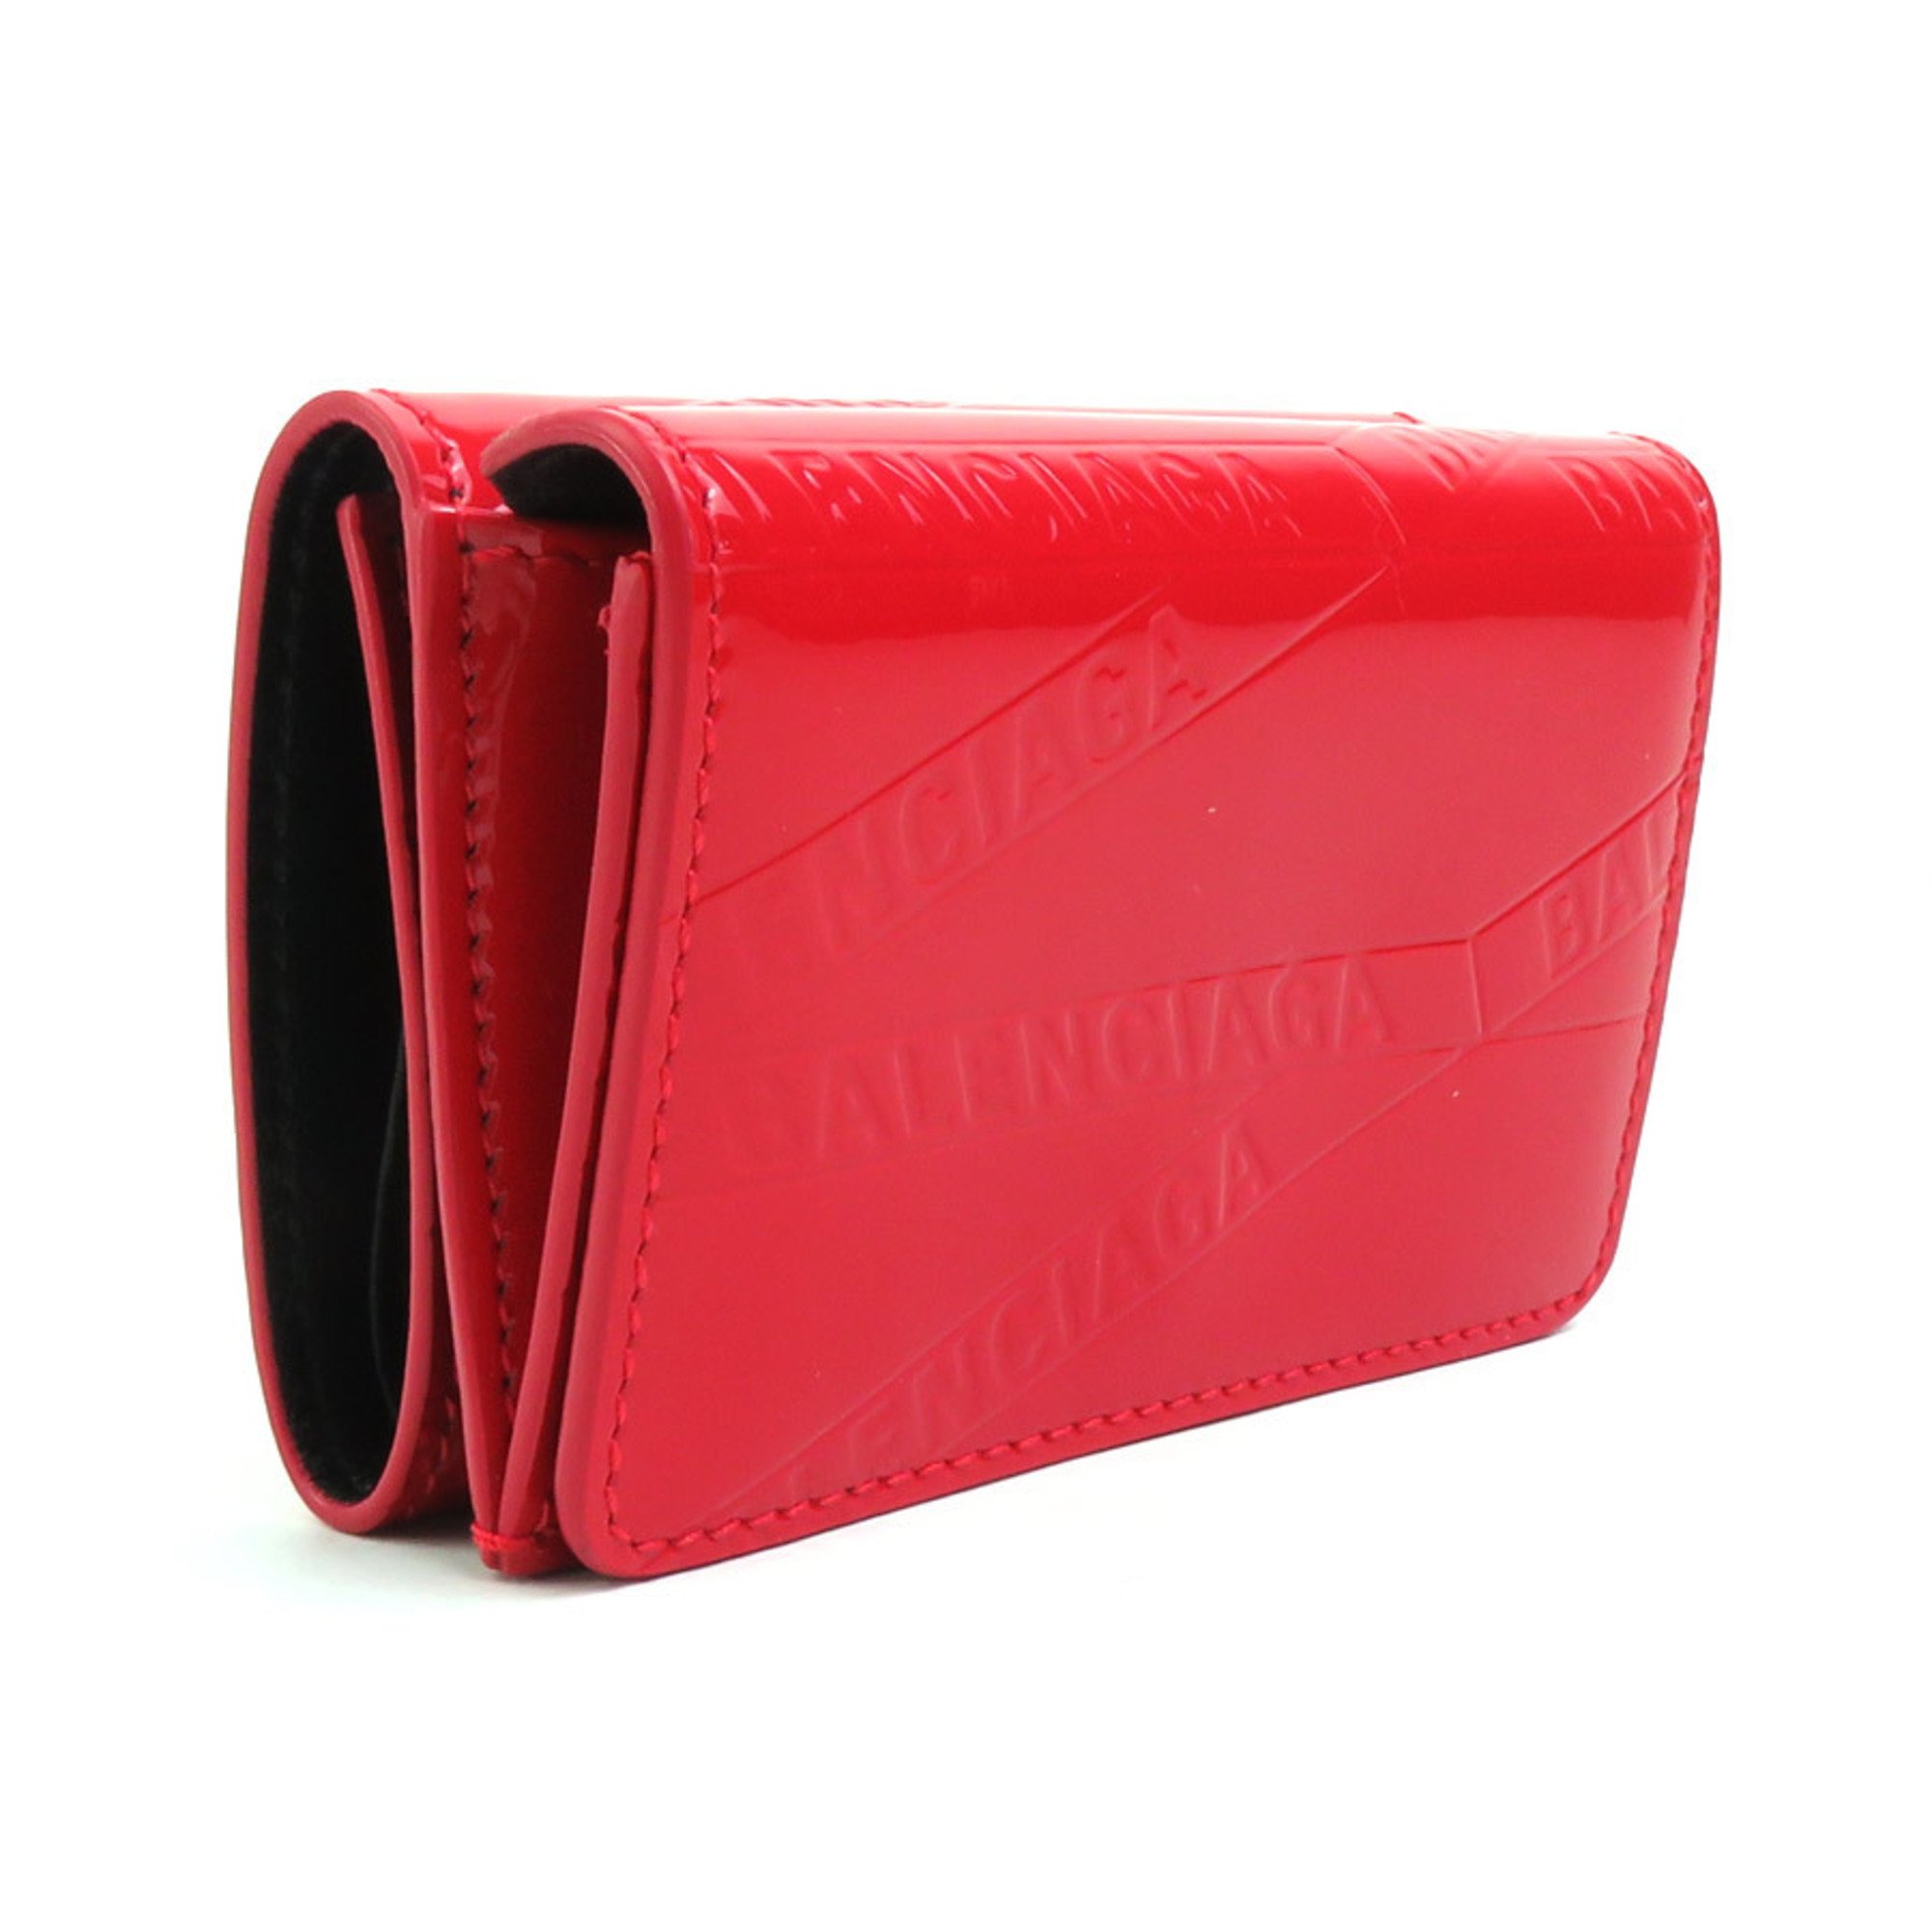 BALENCIAGA Trifold Wallet Patent Leather Red Unisex